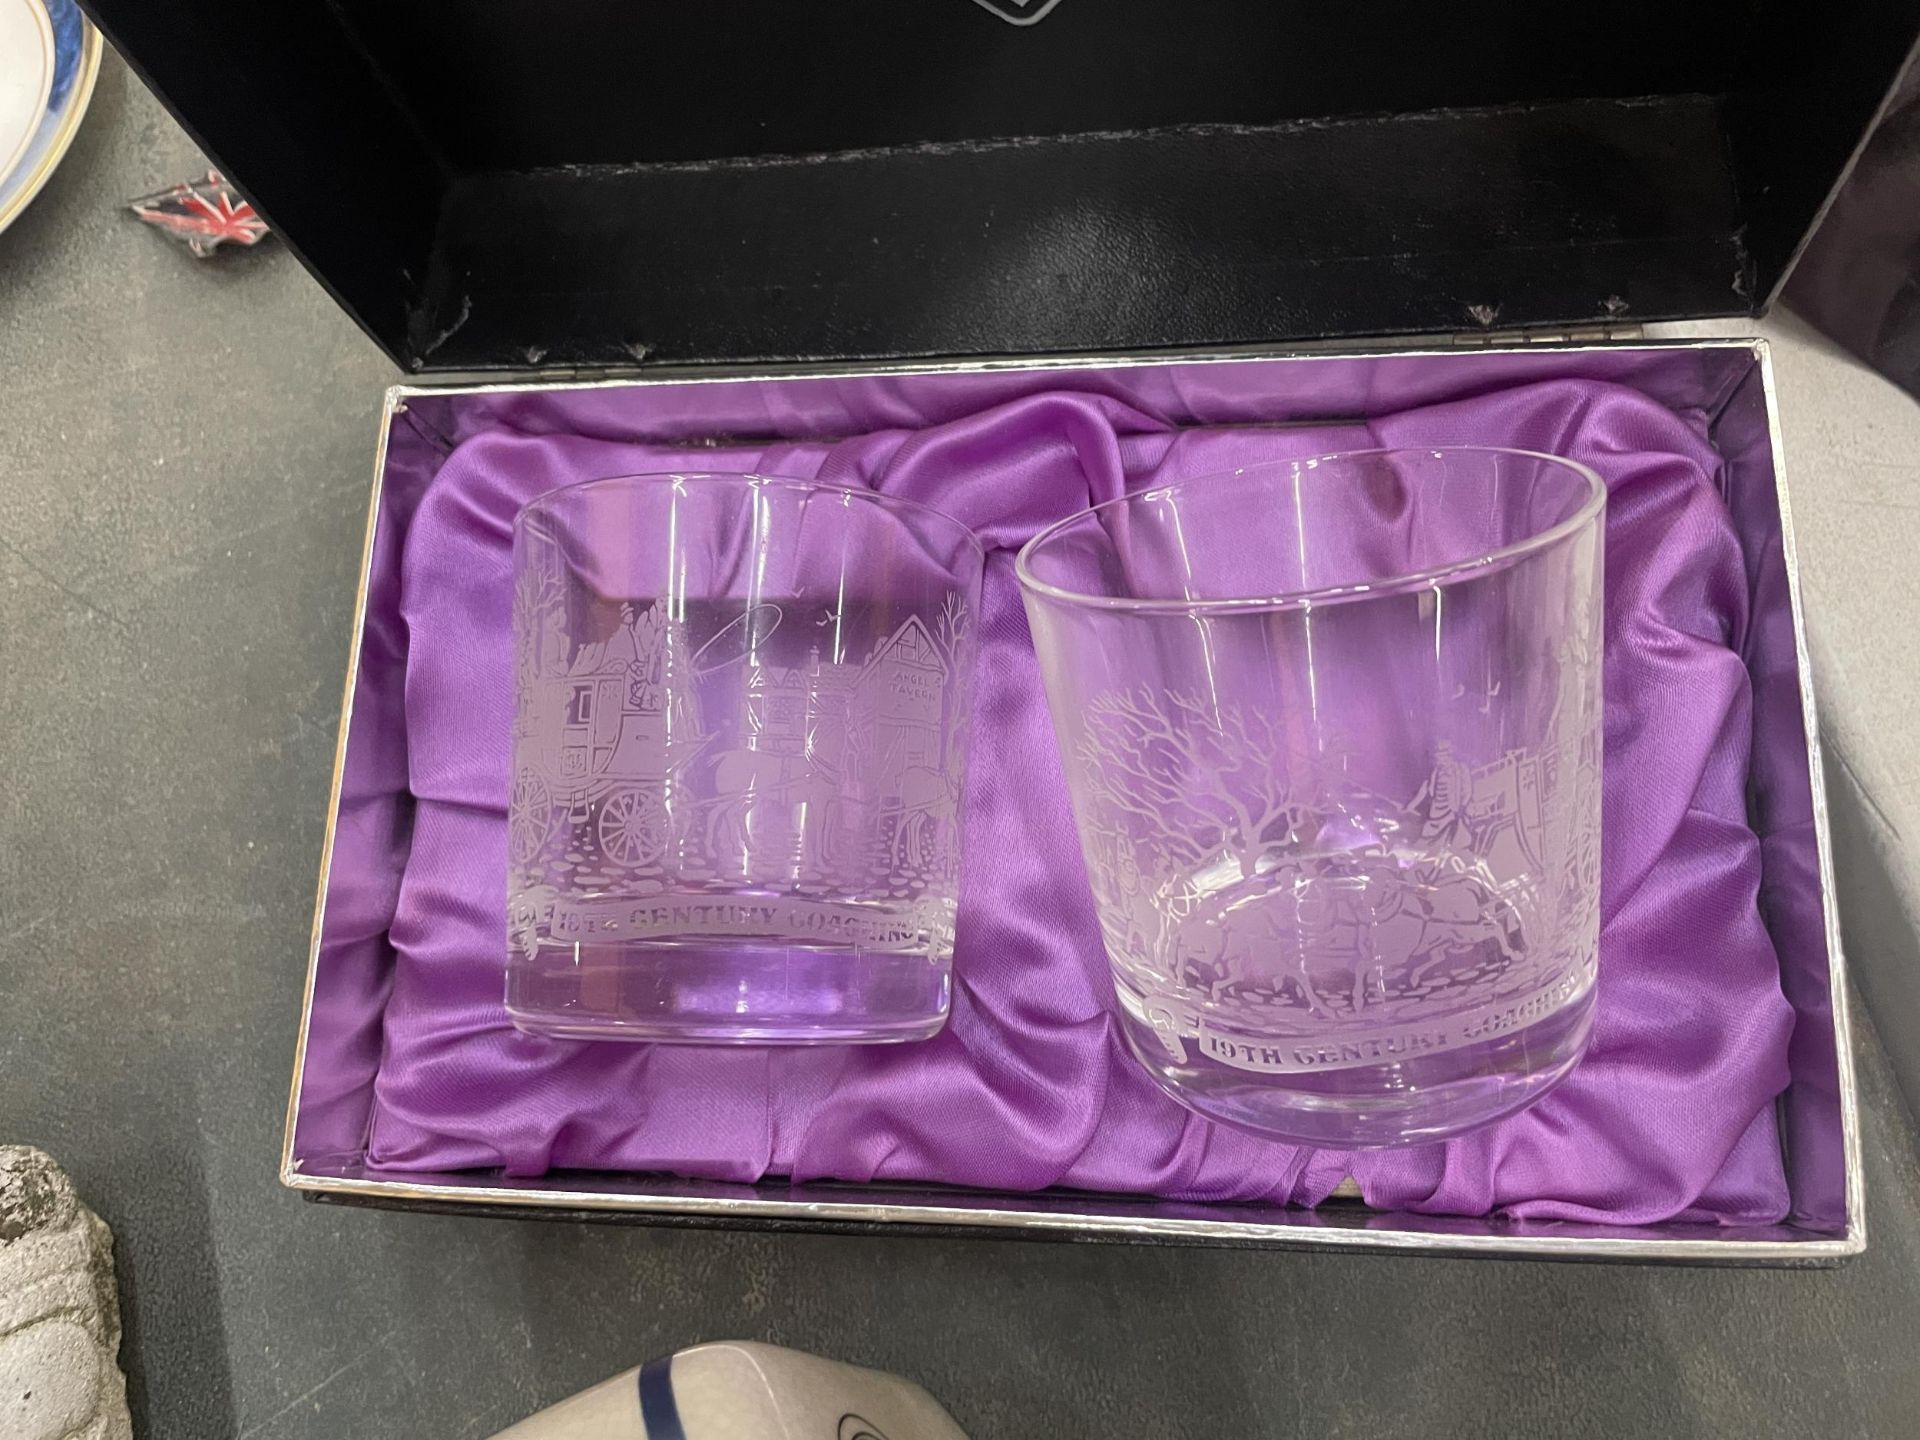 A PAIR OF EDINBURGH INTERNATIONAL WHISKY GLASSES WITH 19TH CENTURY COACHING ENGRAVING, IN